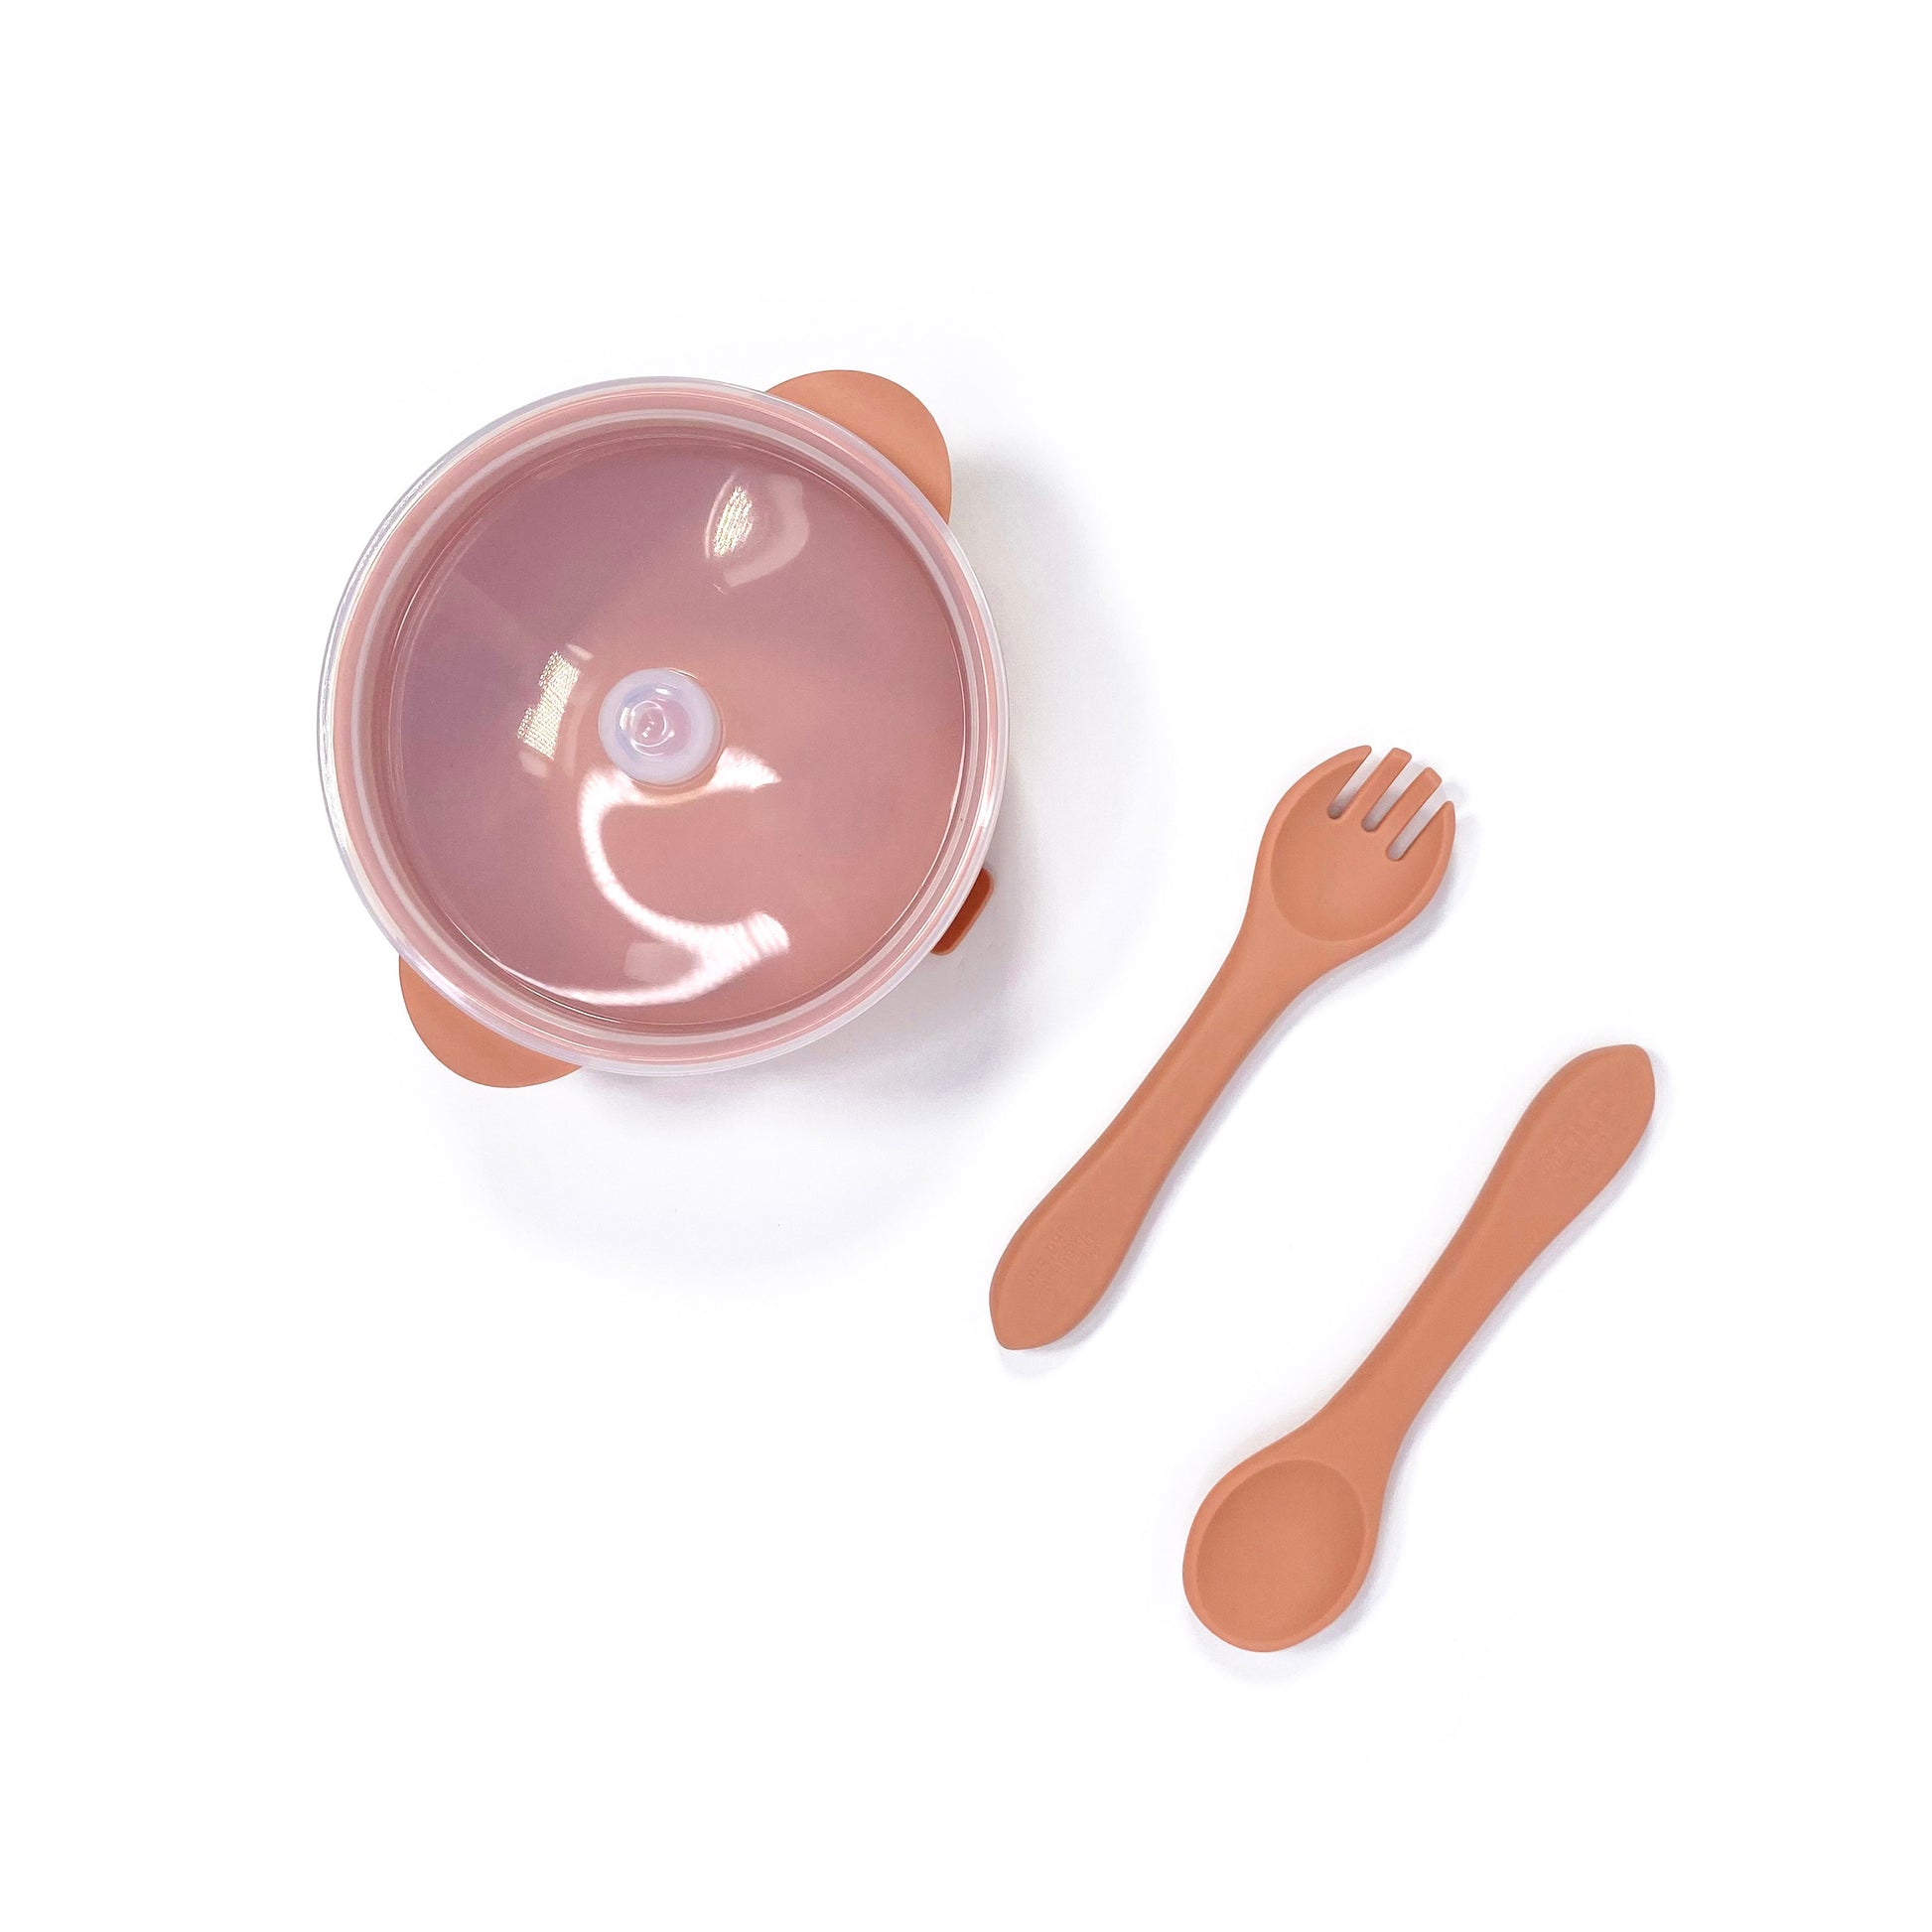 A sunset orange silicone children’s feeding set, including silicone bowl with lid and matching silicone cutlery. Image shows the bowl and cutlery from above, with lid attached.